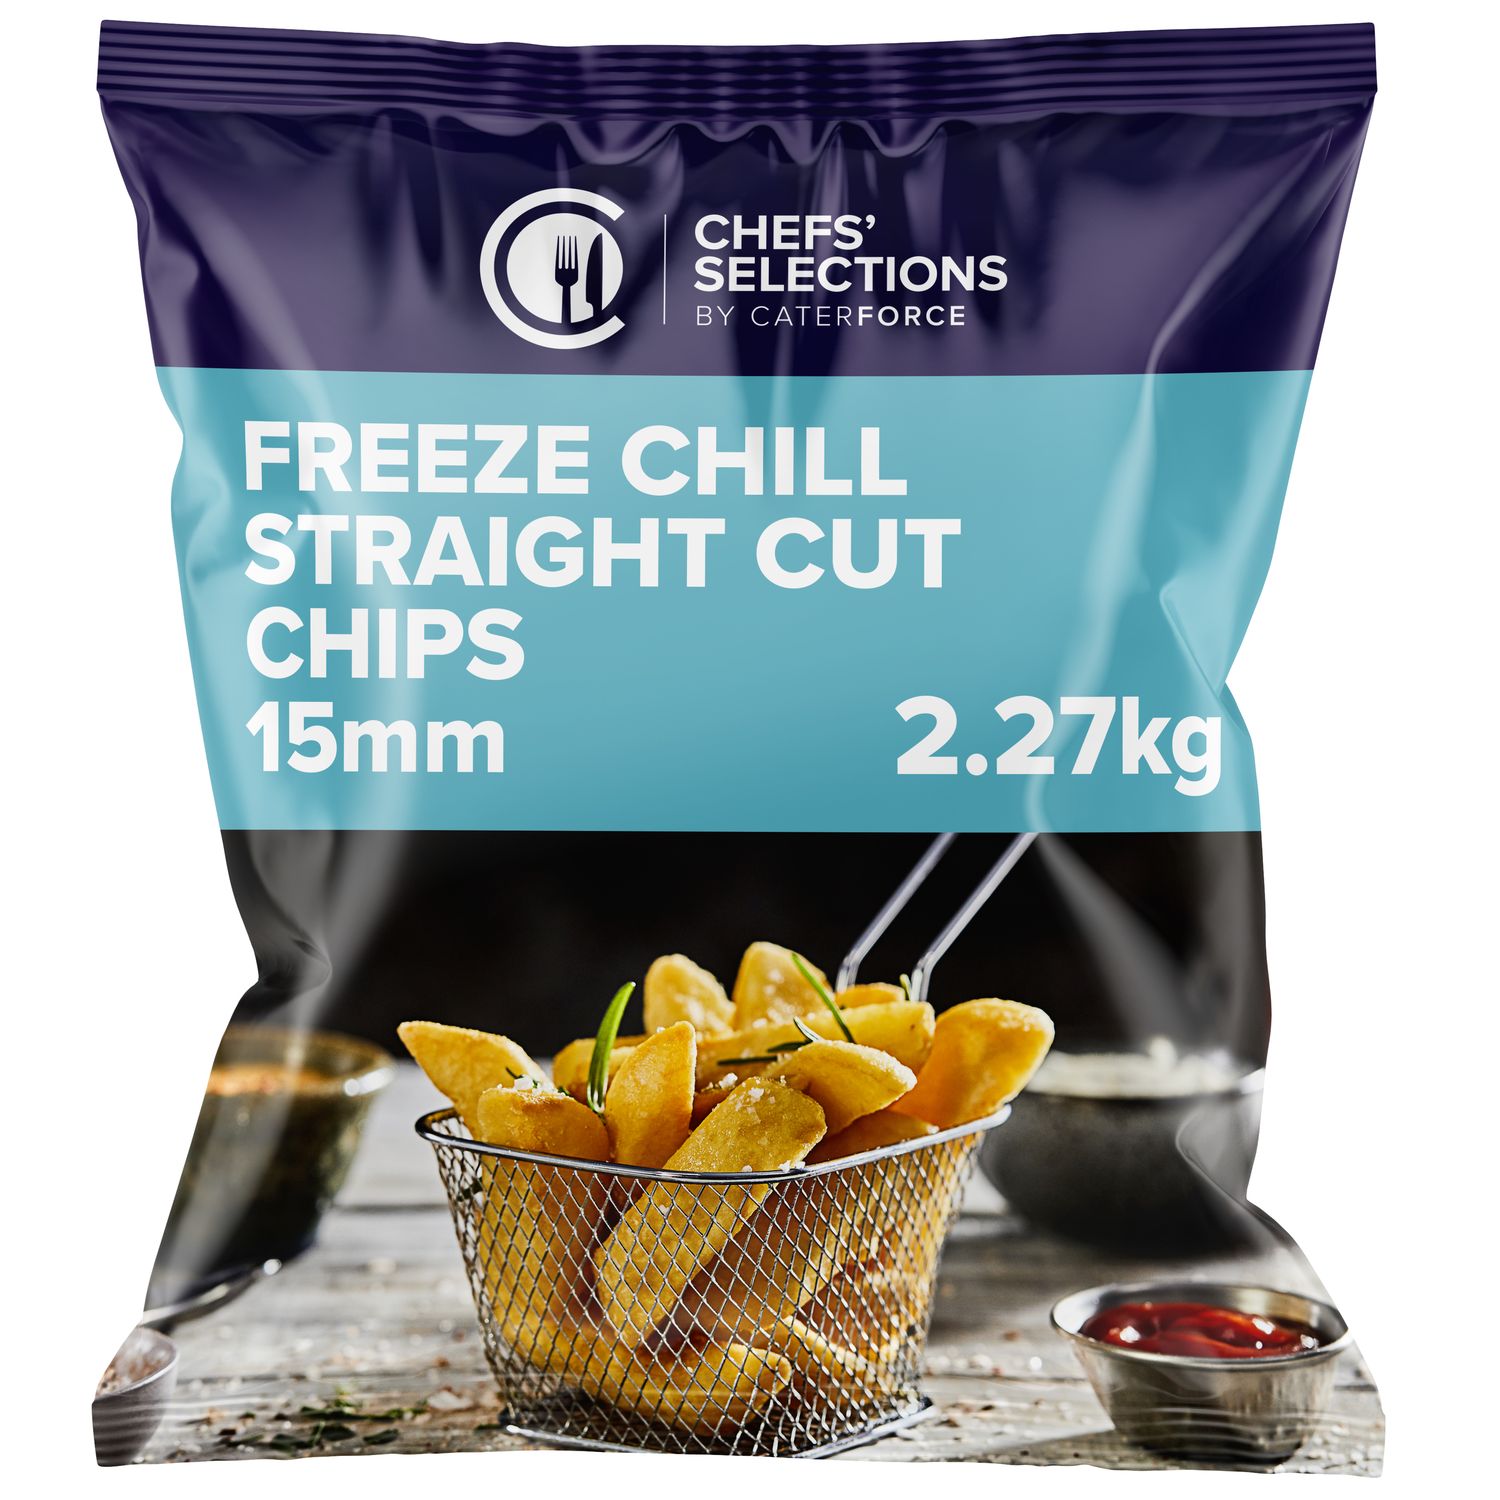 Chefs’ Selections Freeze Chill Straight Cut 15mm Fries (4 x 2.27kg)